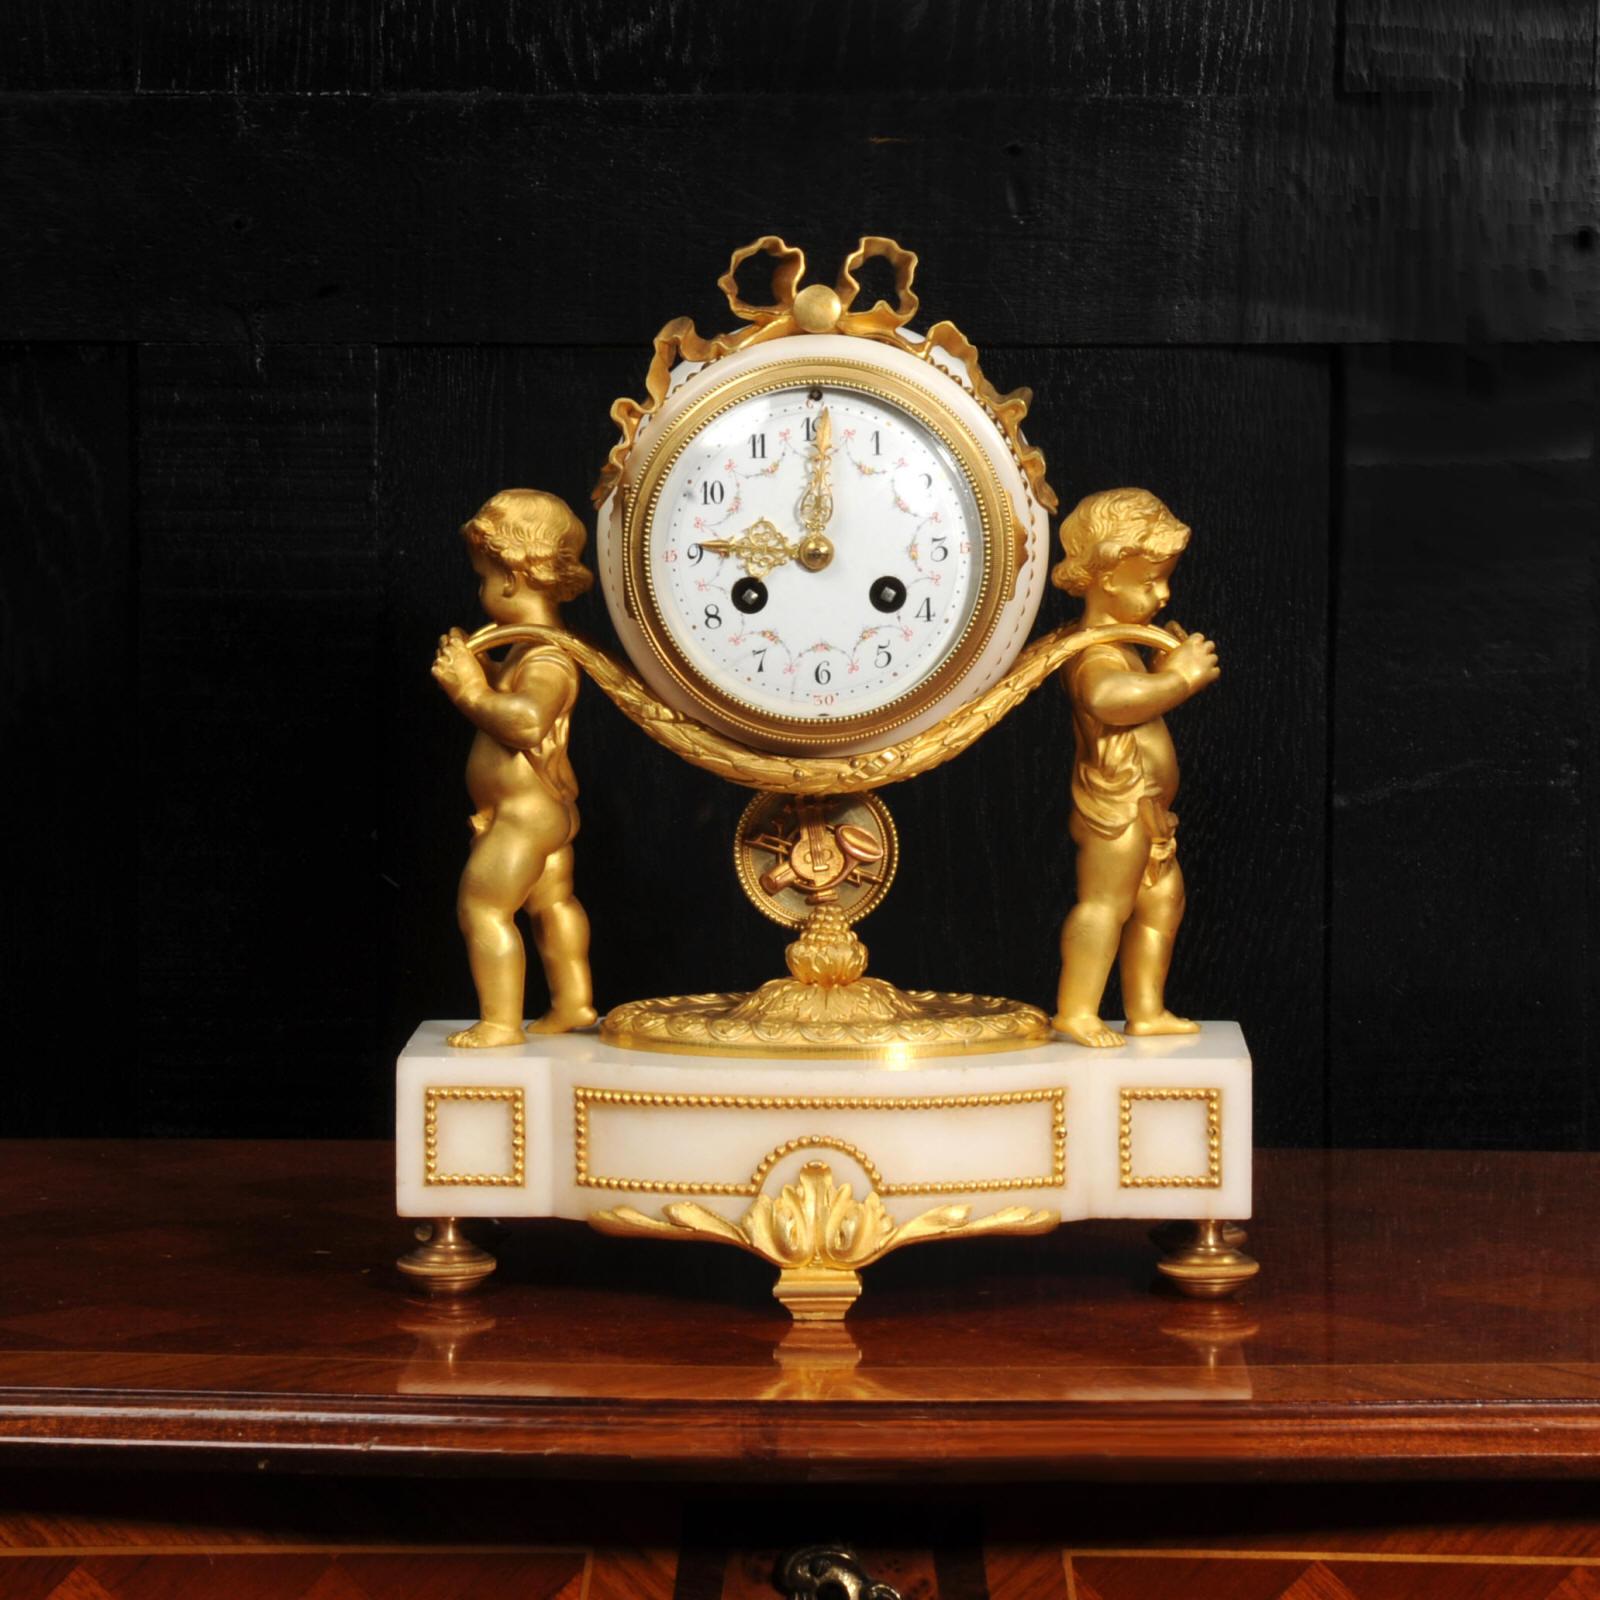 A beautiful original antique French clock modelled in the Louis XVI style as two charming cherubs carrying the clock on laurel wreaths. The pendulum with applied musical motifs, swinging gently below. It is beautiful made in ormolu (finely gilded